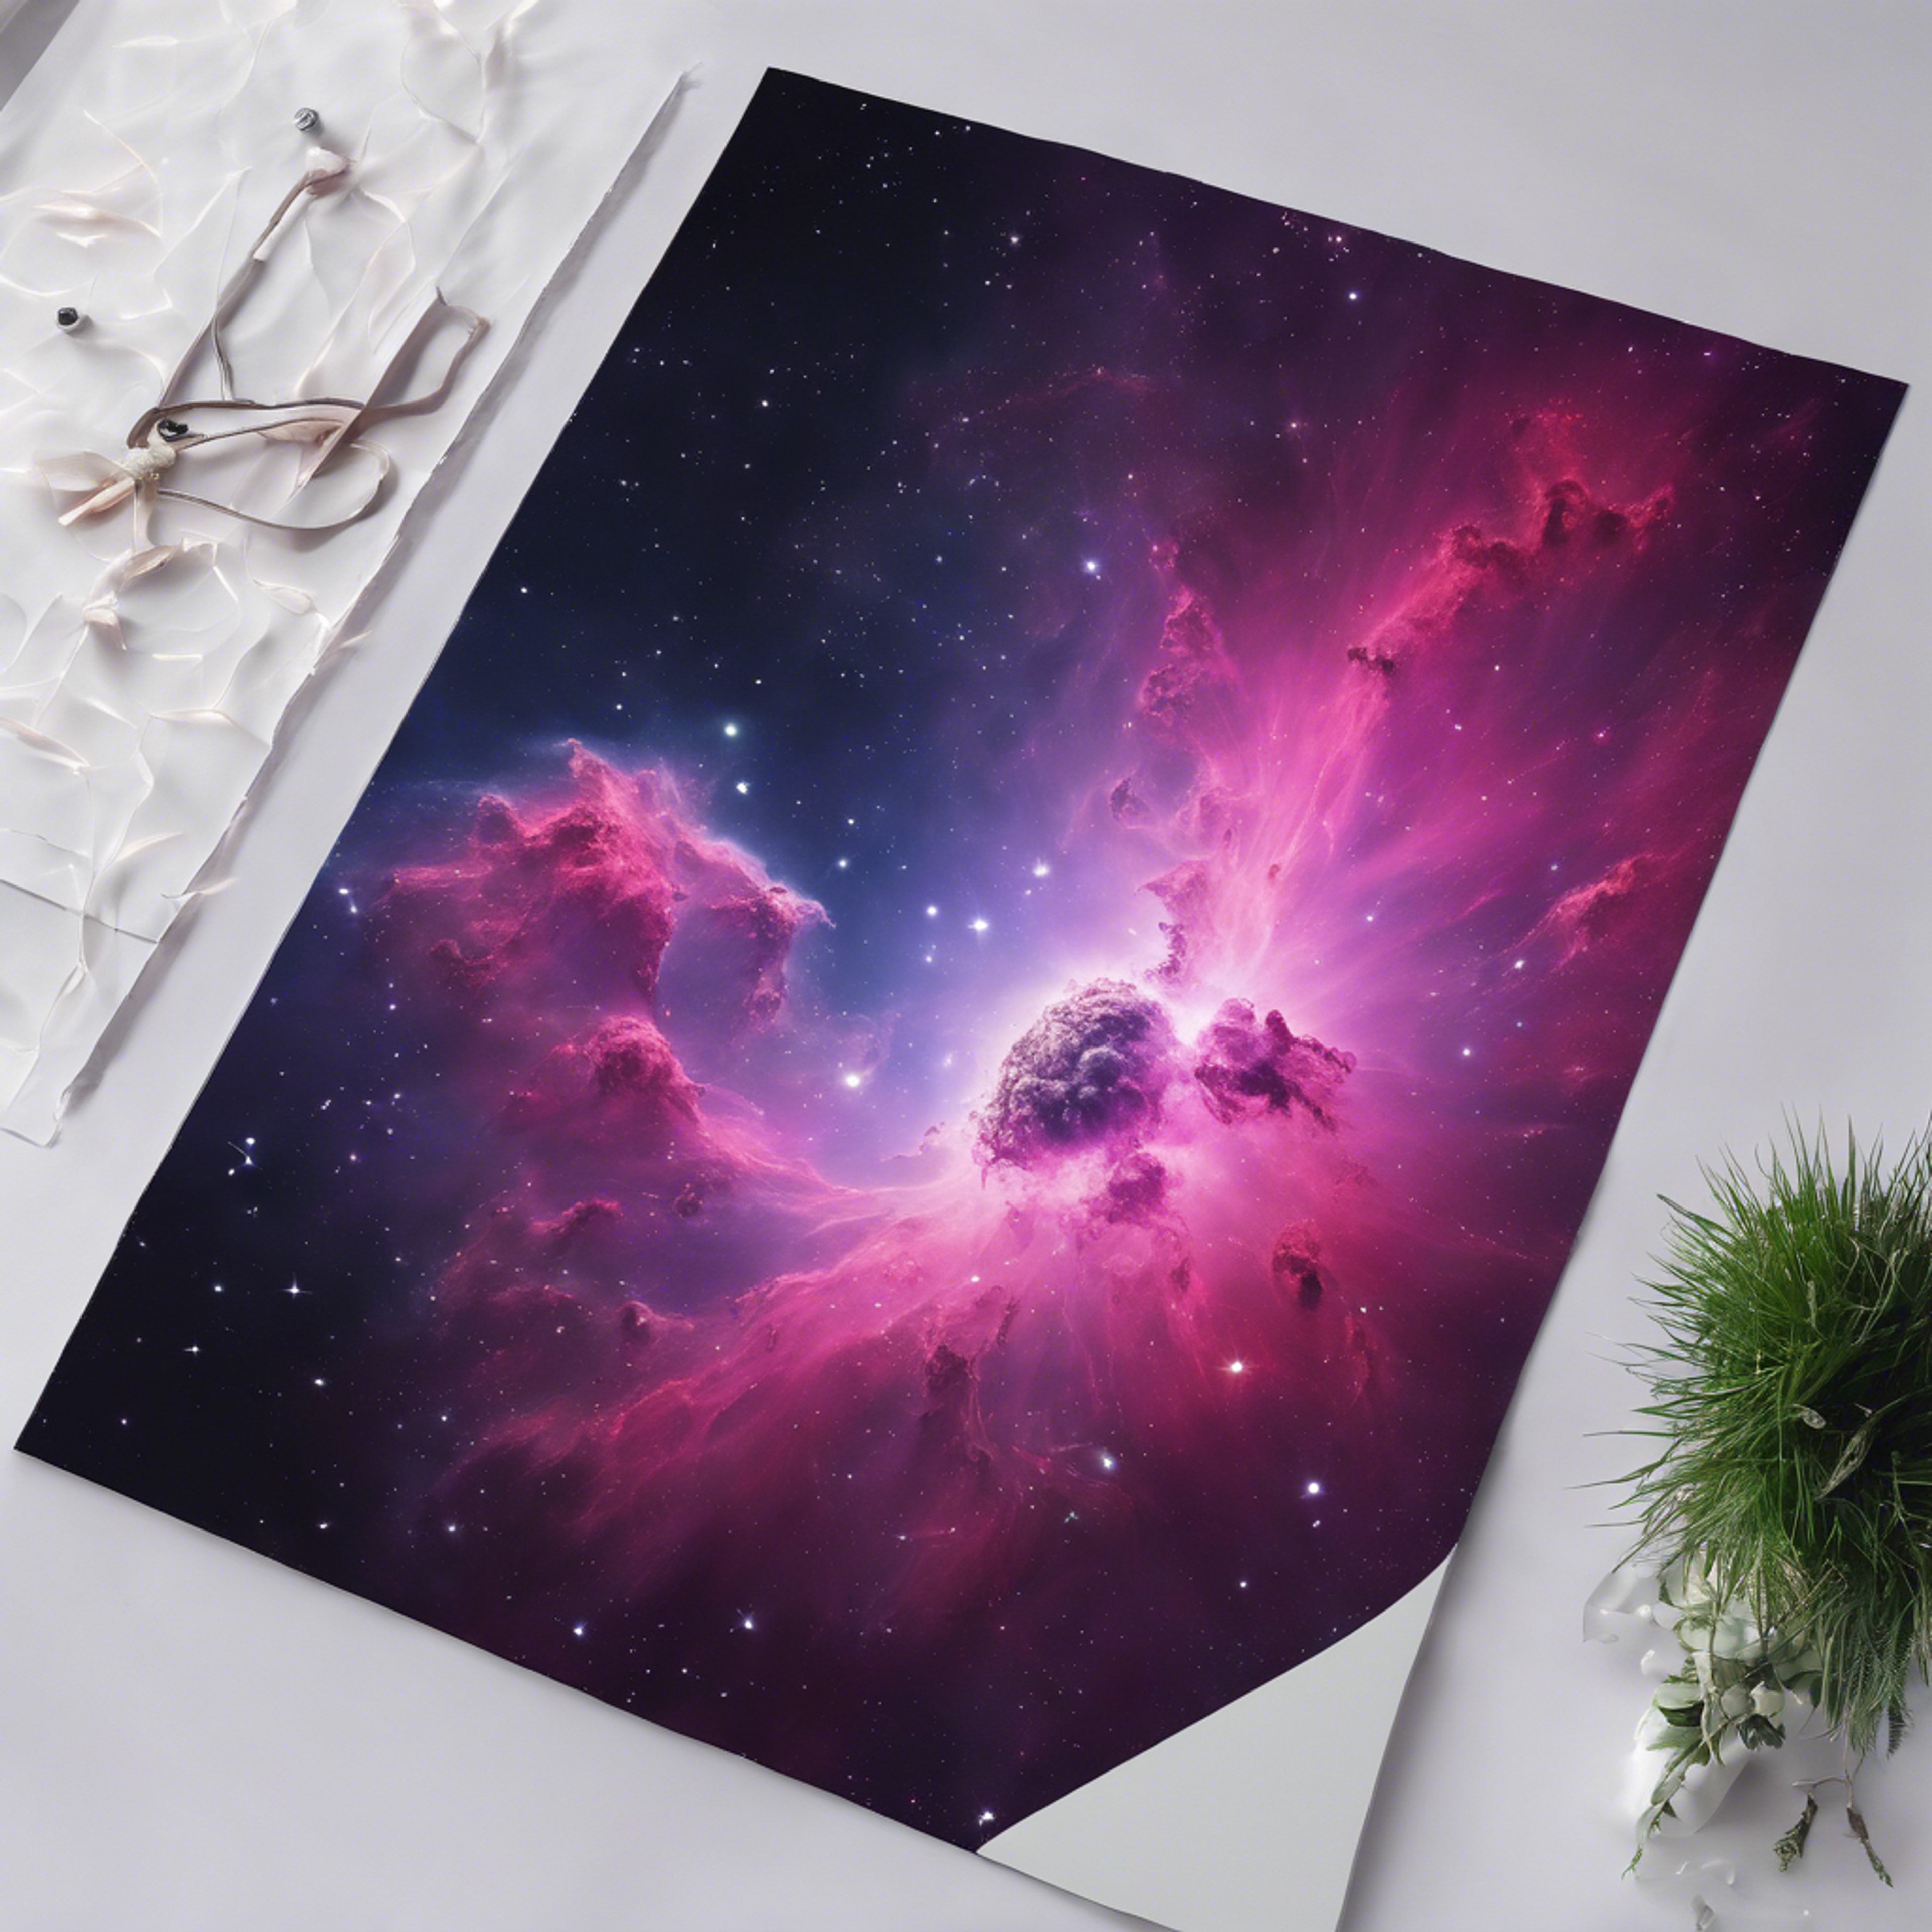 A sweeping view of a vibrant pink and purple nebula in space.壁紙[4da82f83541843d5b983]